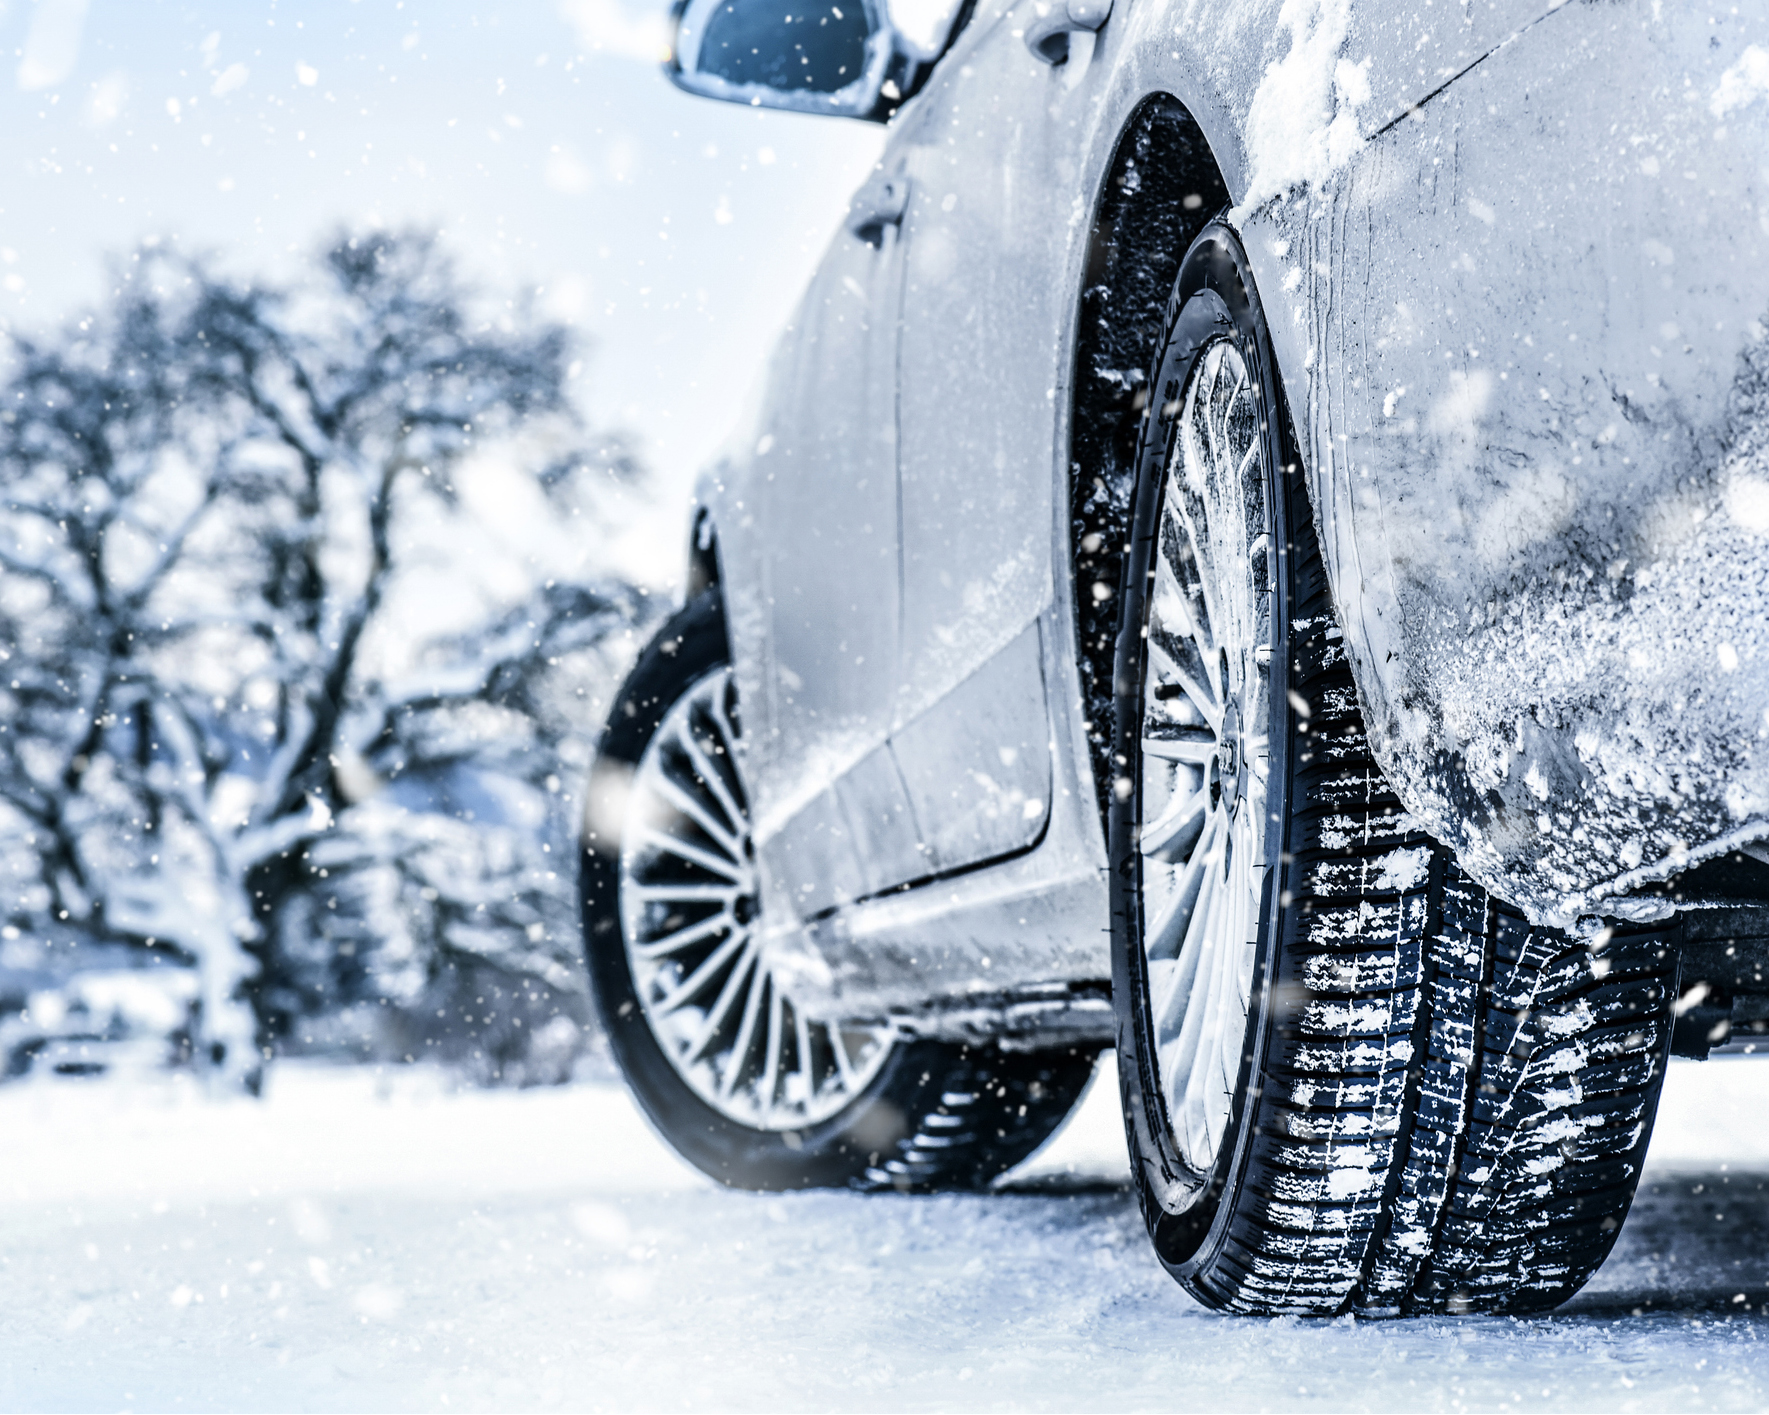 Winter tire. Car in winter. Tires on snowy road detail 